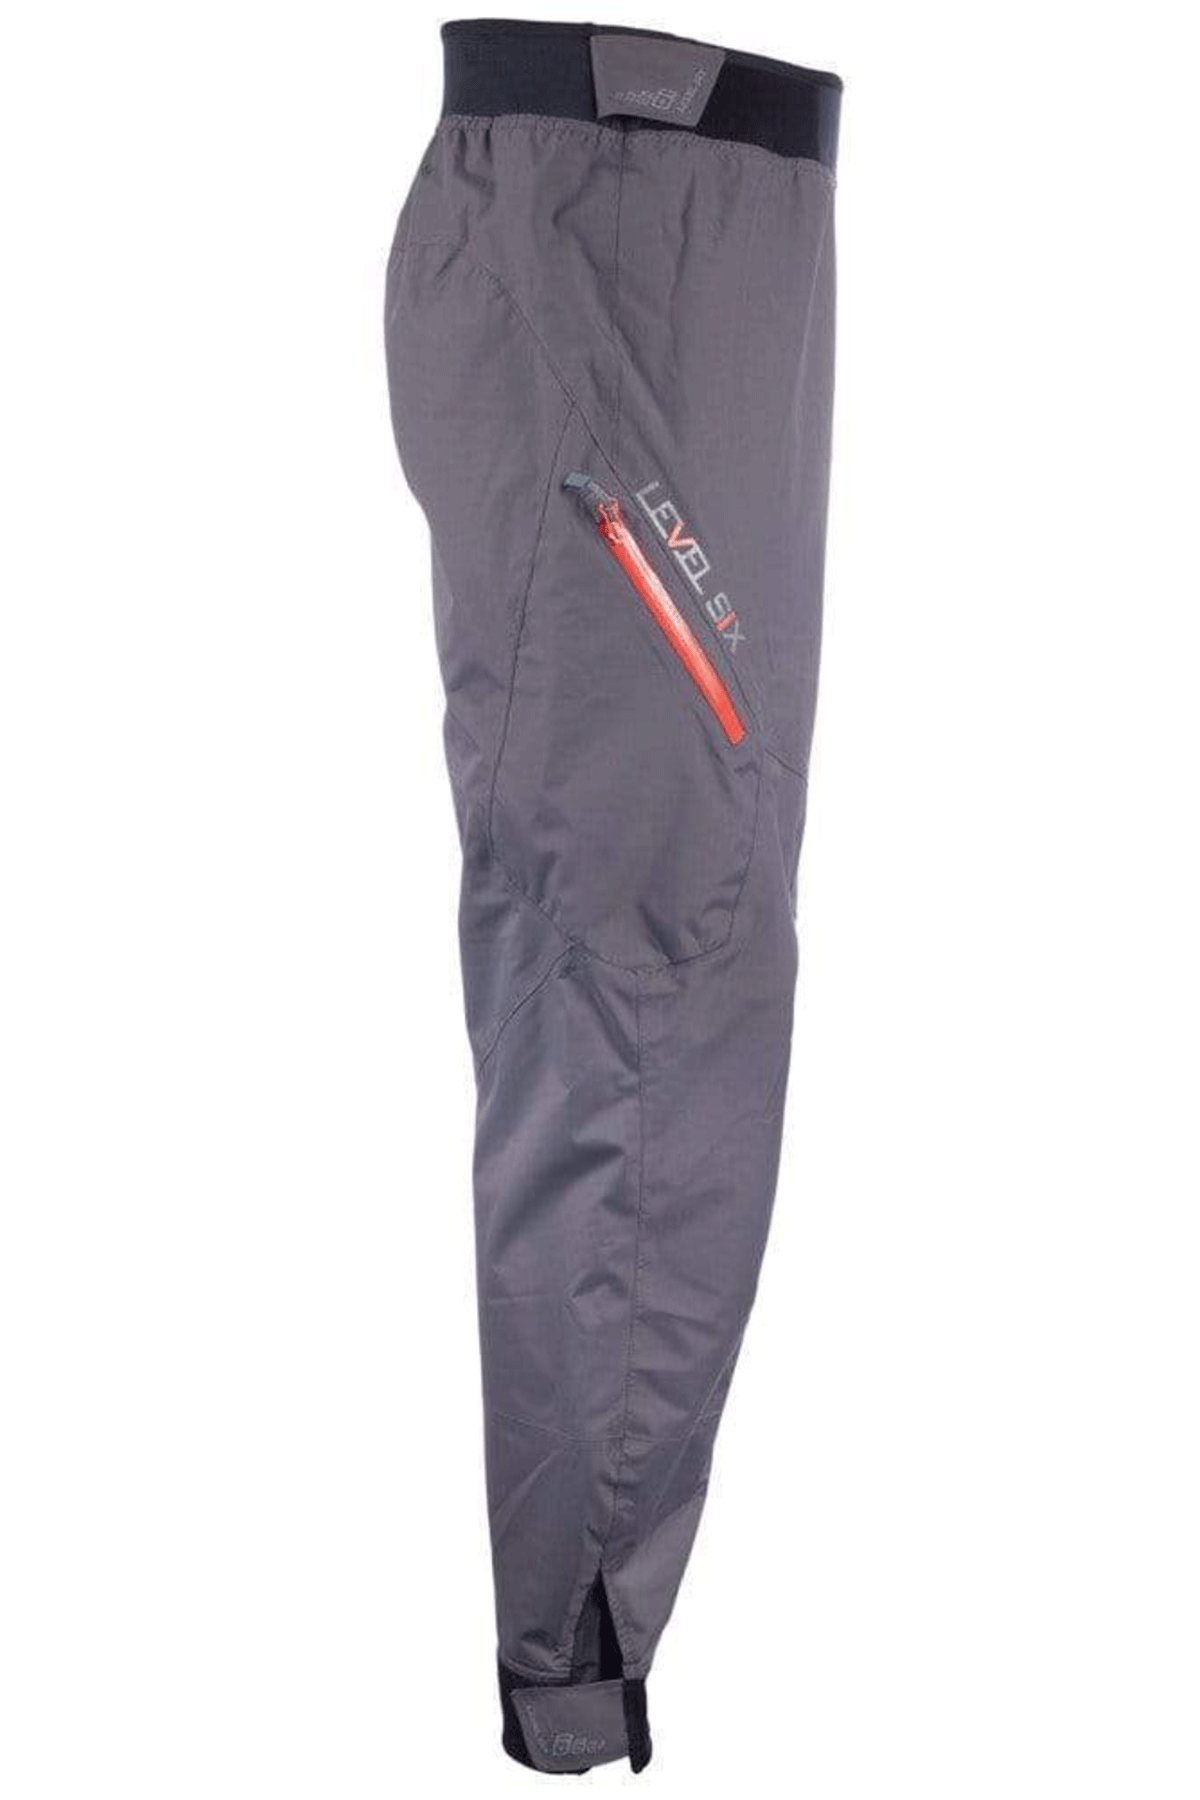 Level Six Charcoal Paddling Semi Dry Pant Right Side View